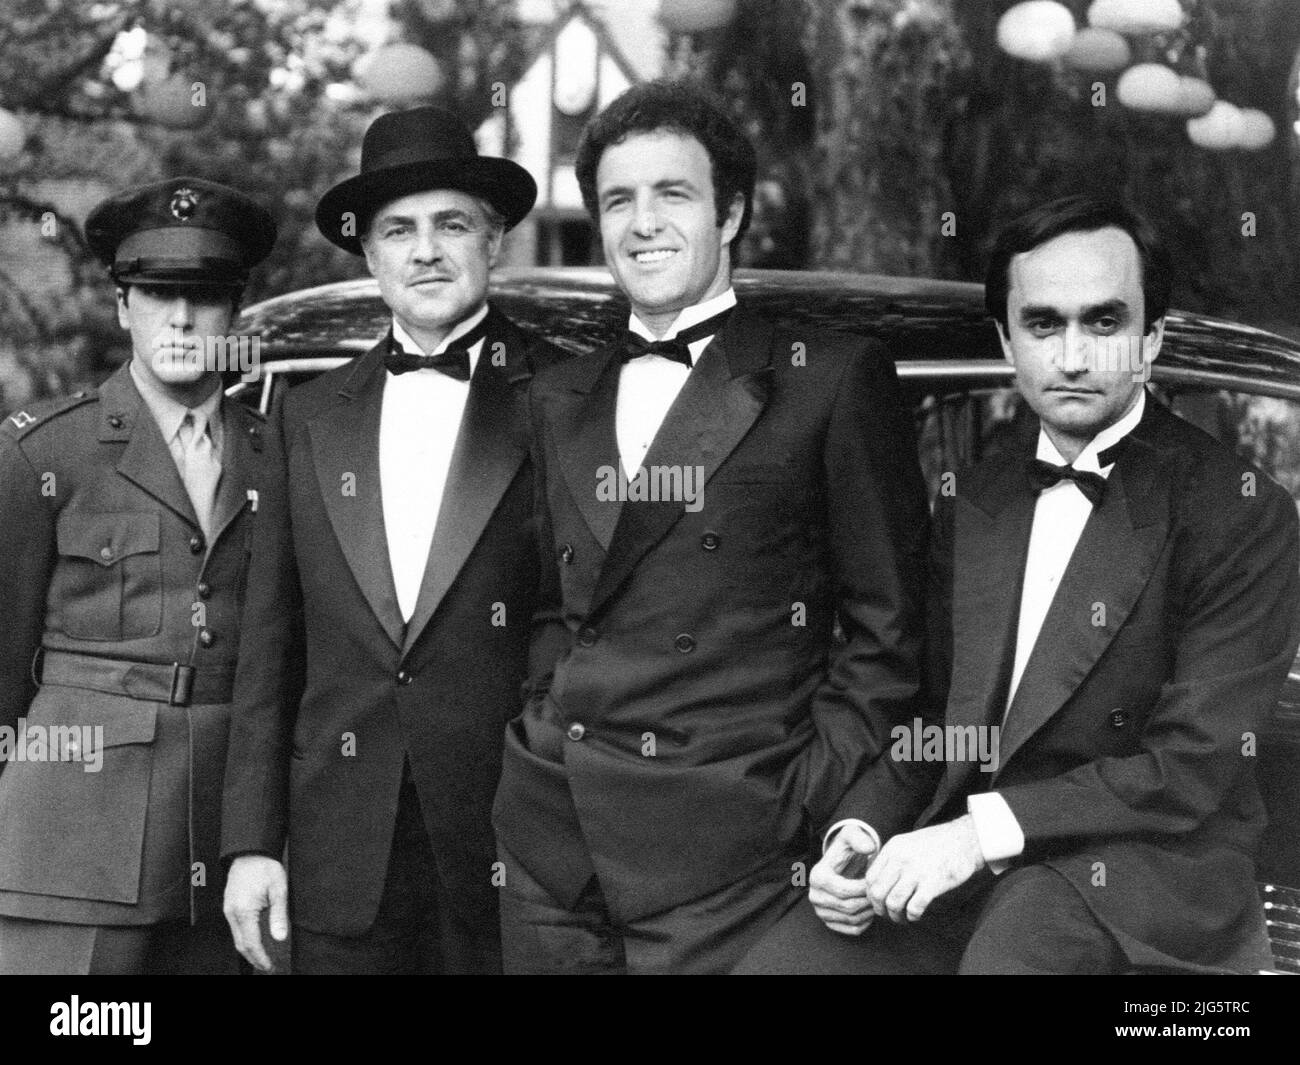 Al Pacino, Marlon Brando, James Caan and John Cazale 'The Godfather' 1972 Paramount Credit: PictureLux/The Hollywood Archive/Alamy Live News Stock Photo